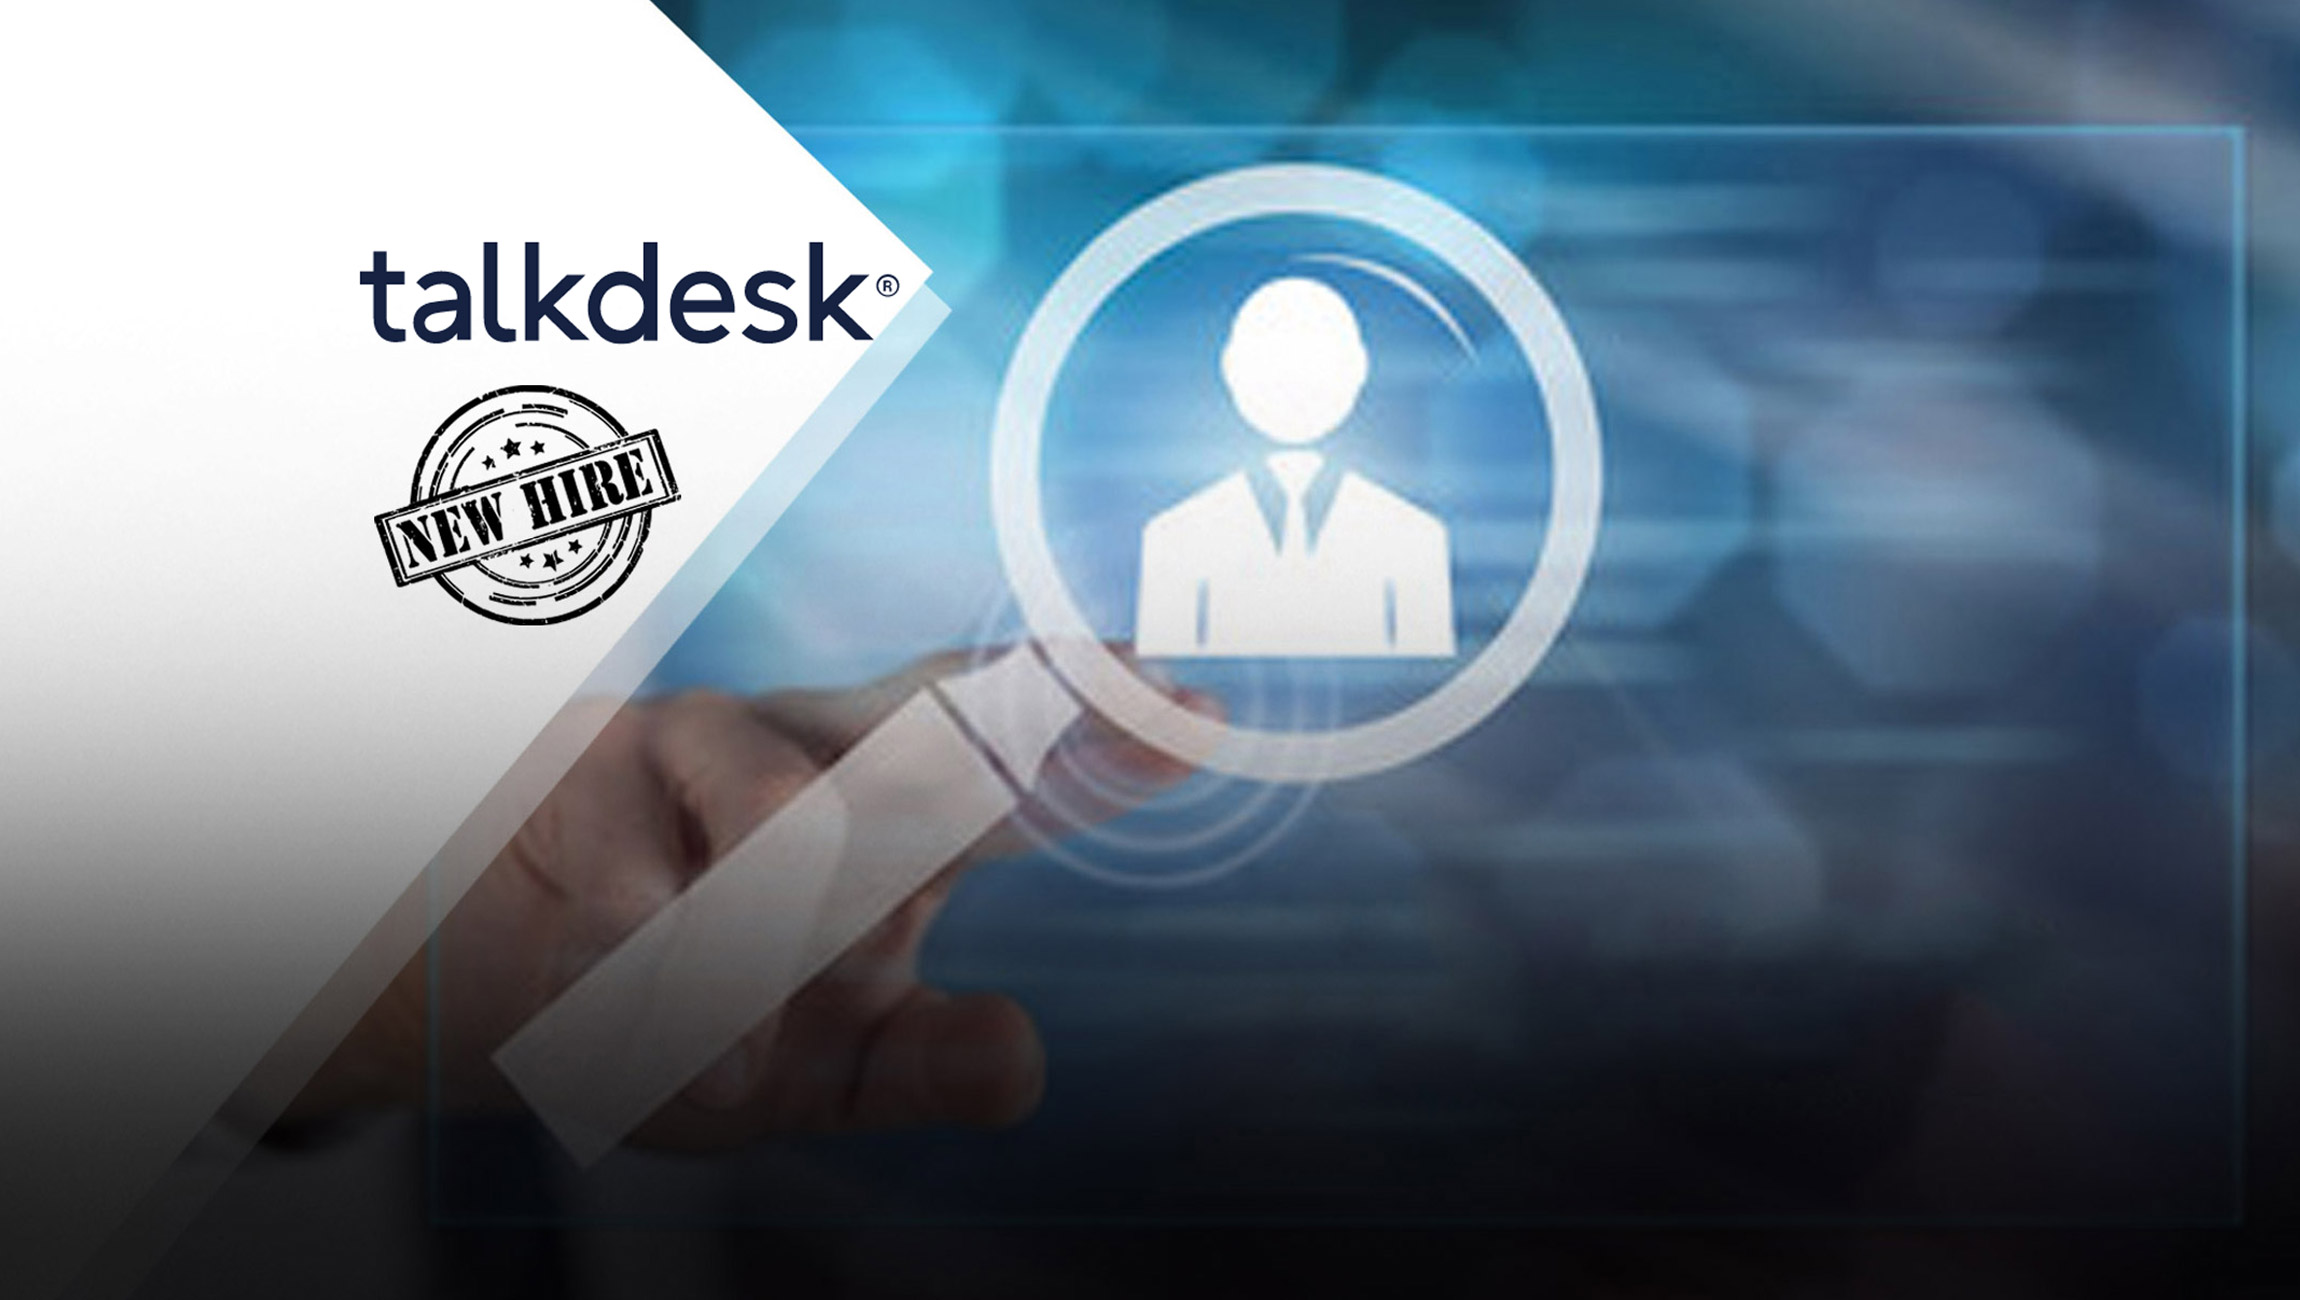 Talkdesk Announces Chief Revenue Officer, Chief Customer Officer and International Chief Operating Officer Appointments as Company Moves Into Next Phase of Growth, Global Expansion